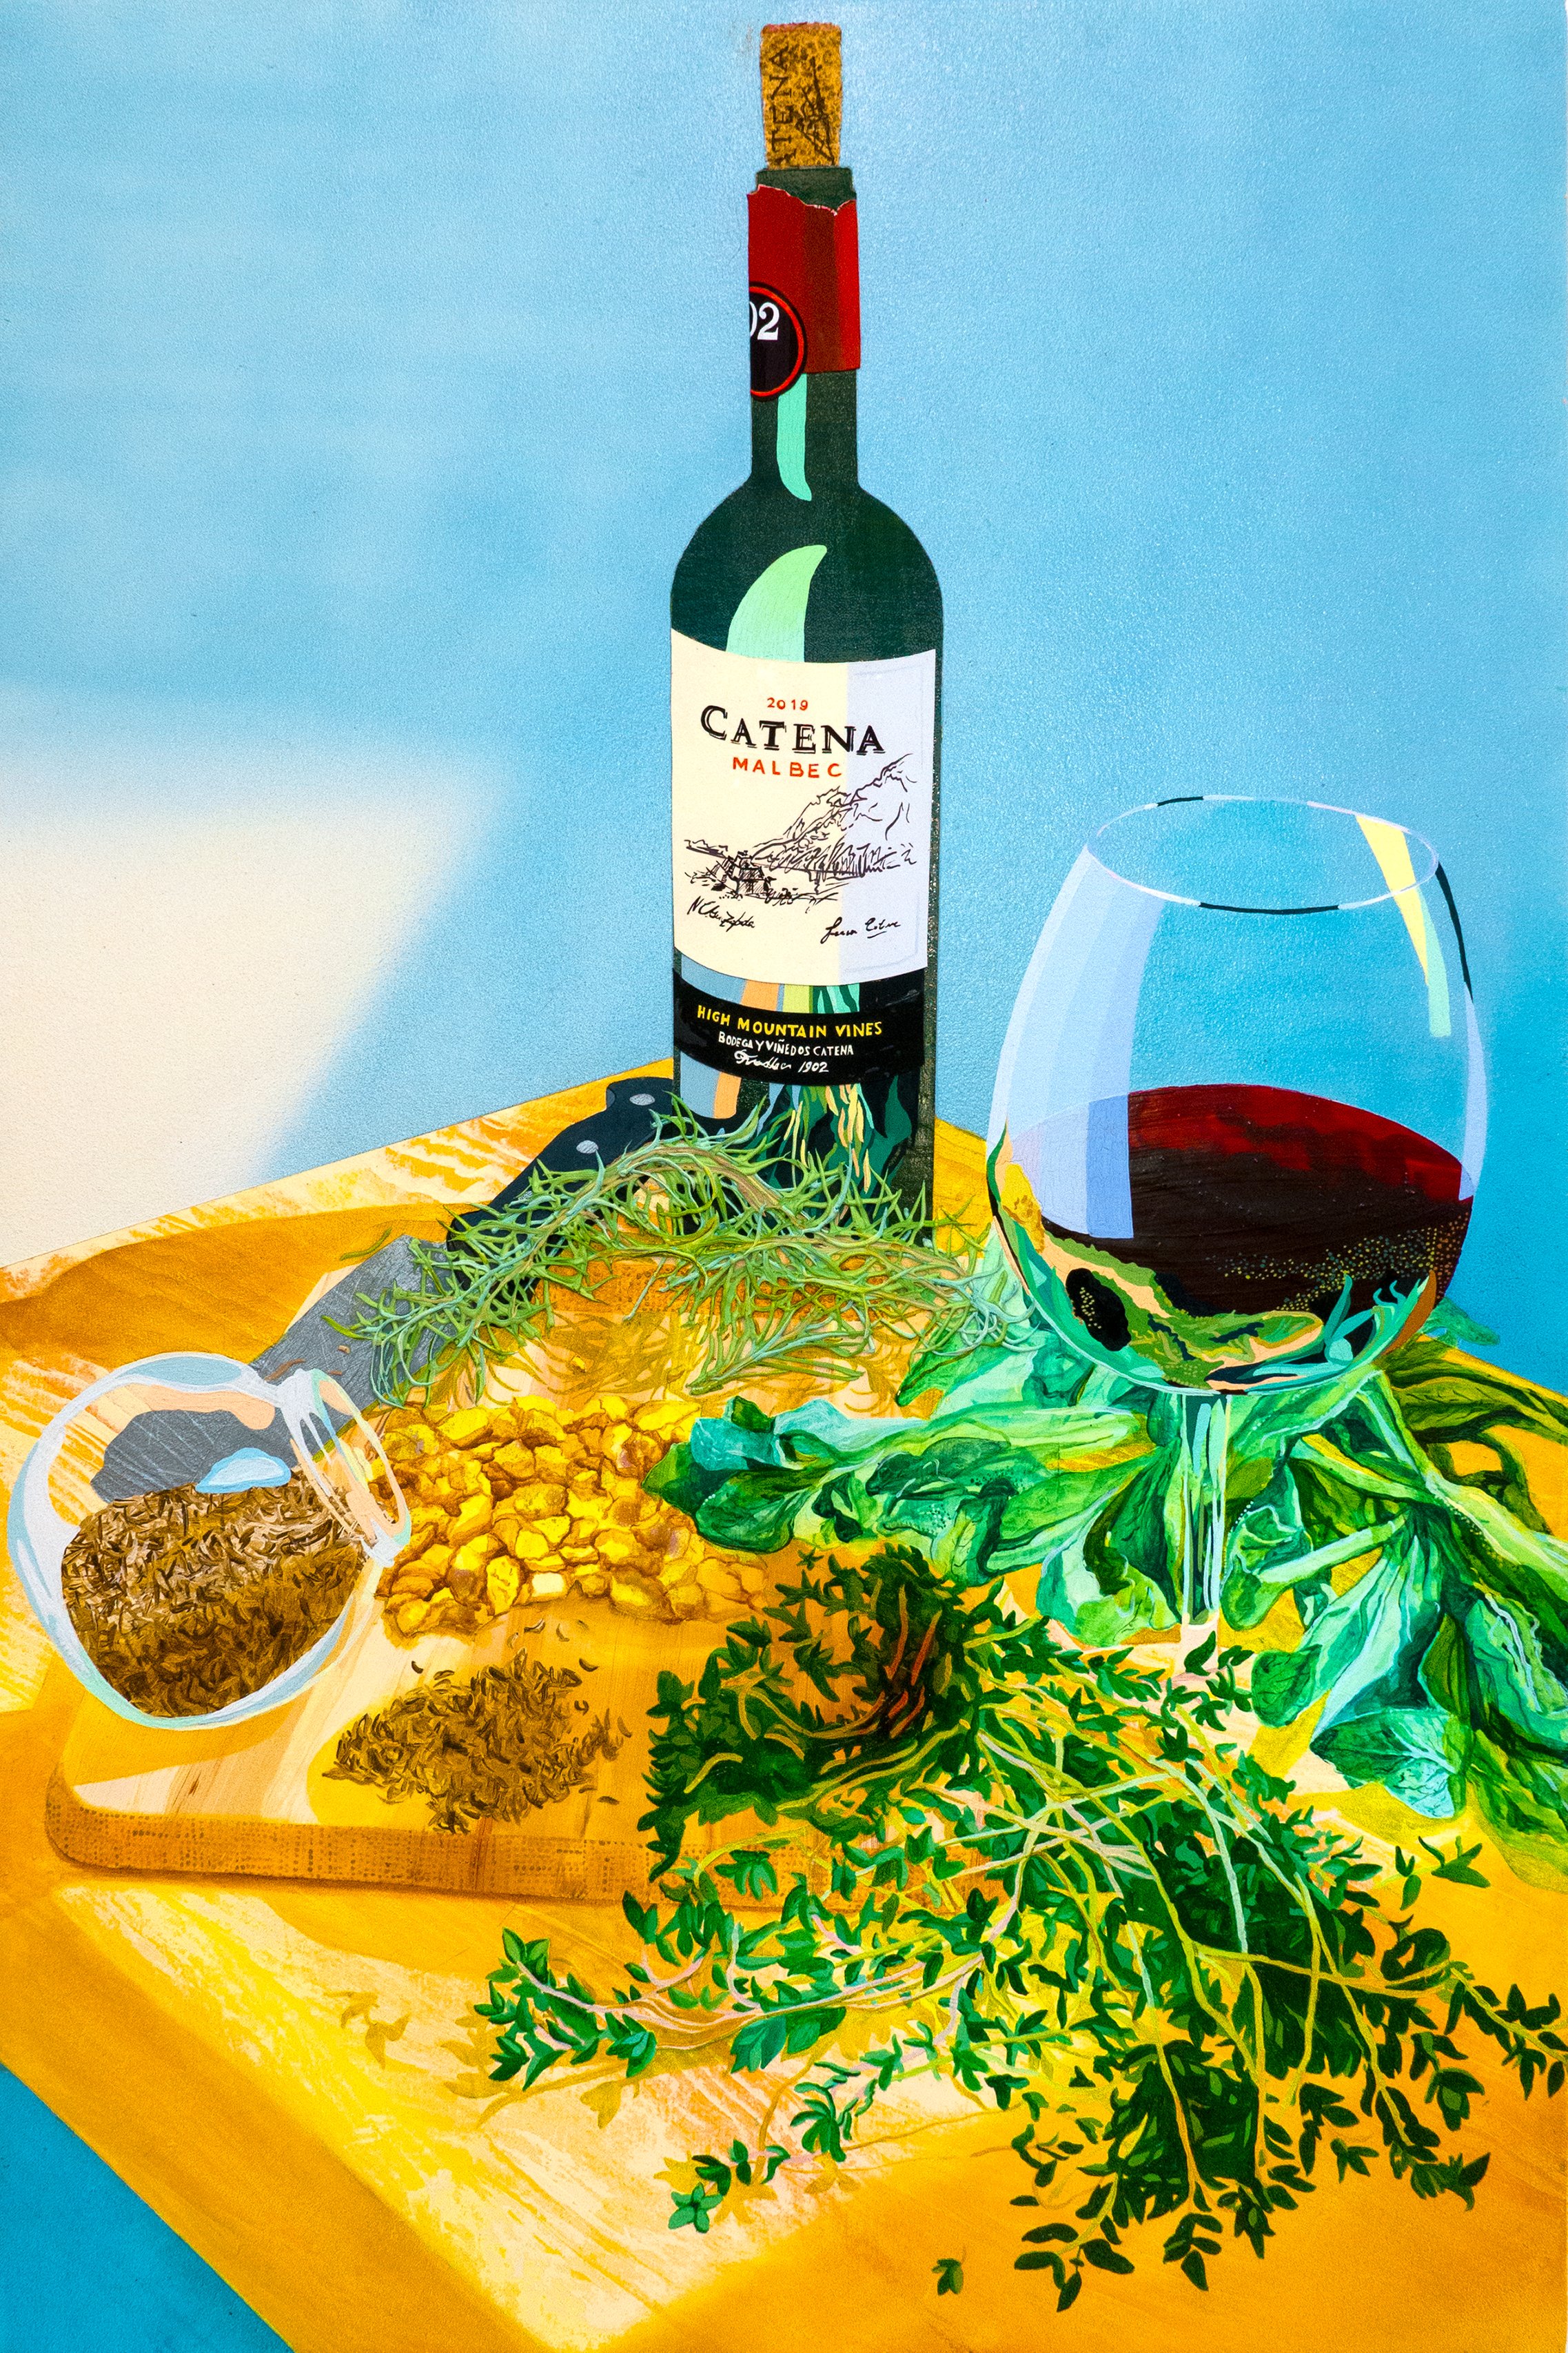 Catena (Learning to Like Malbec)